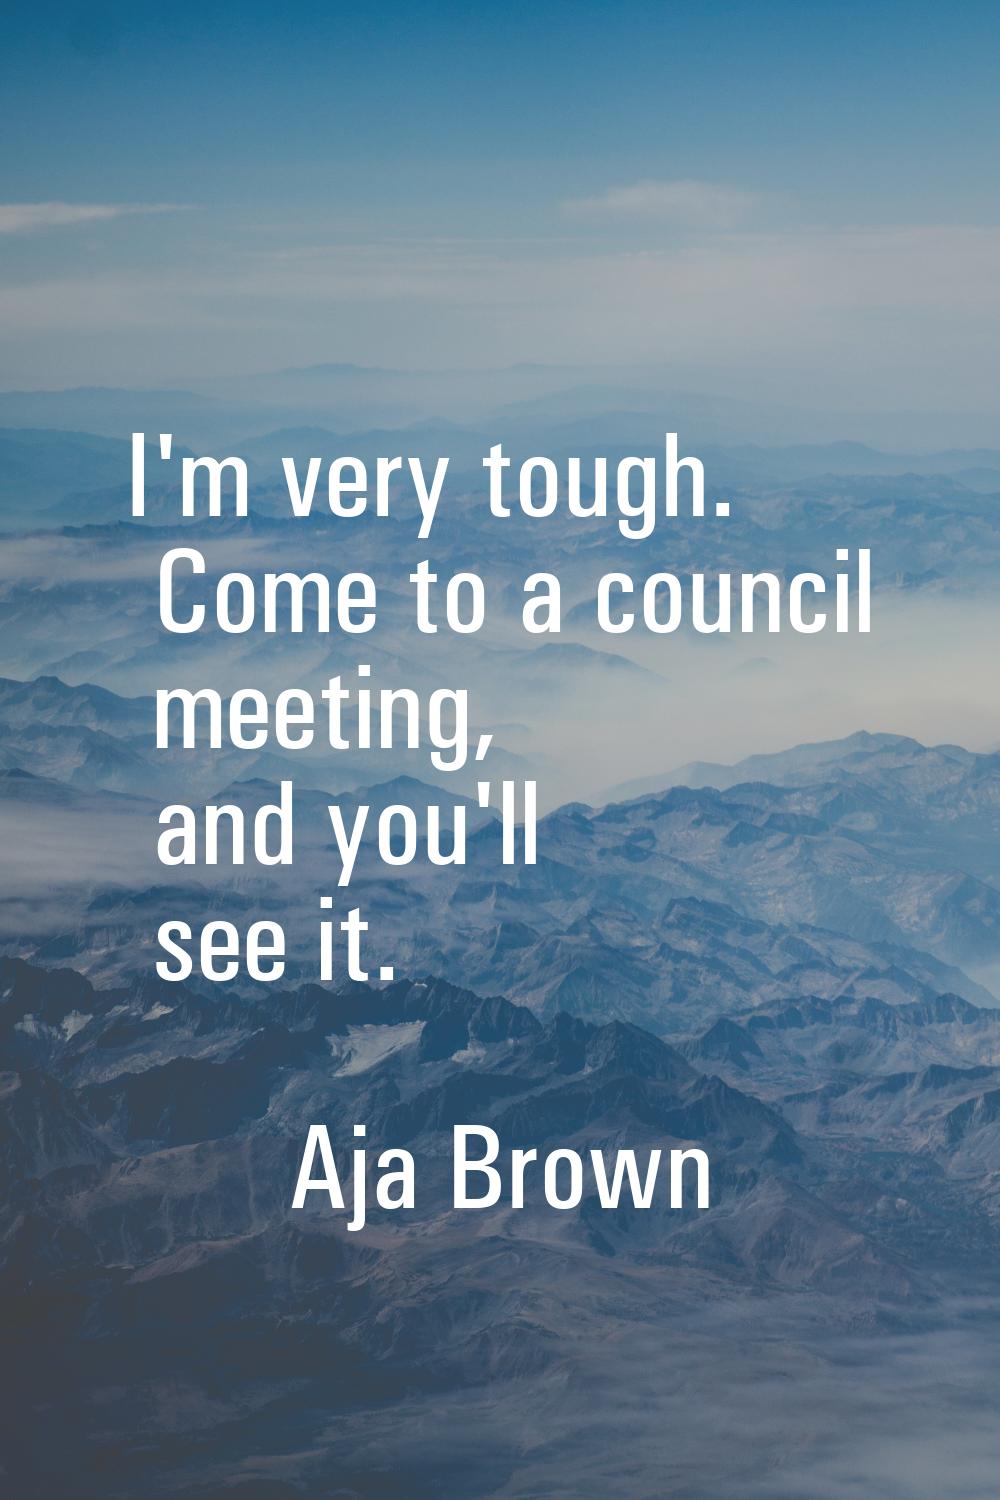 I'm very tough. Come to a council meeting, and you'll see it.